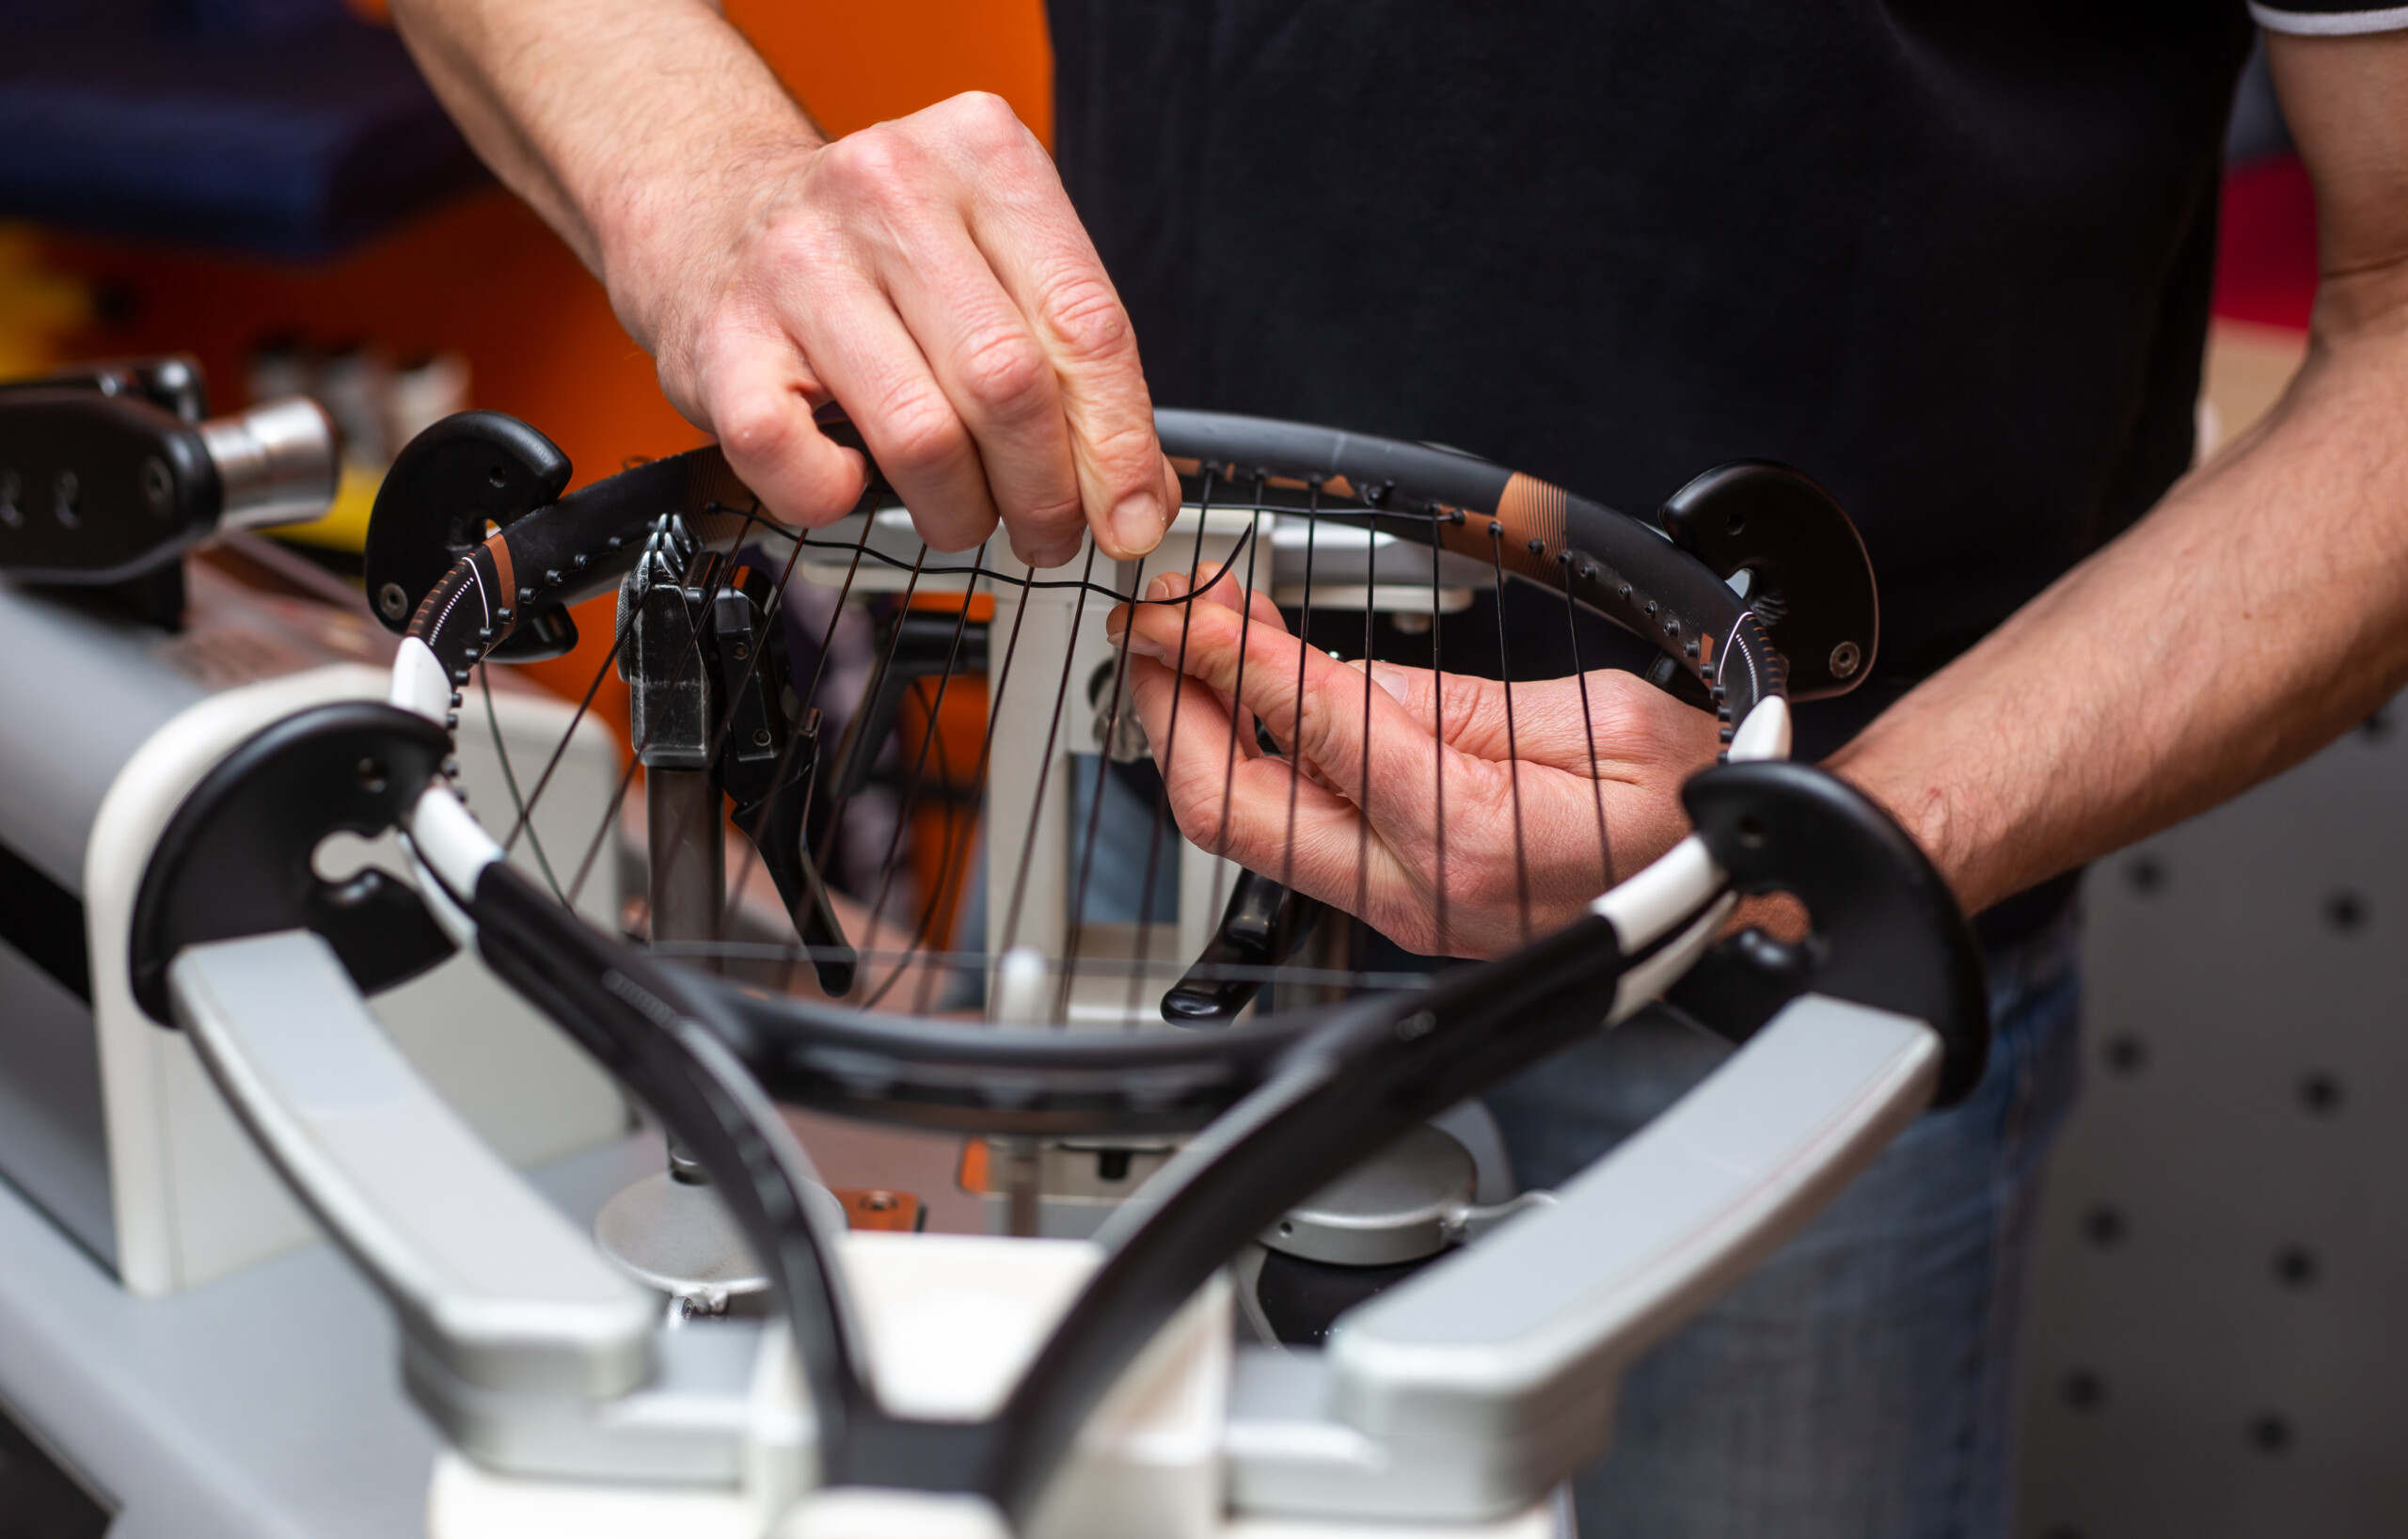 Process of stringing a tennis racket in tennis shop, sport and leisure concept